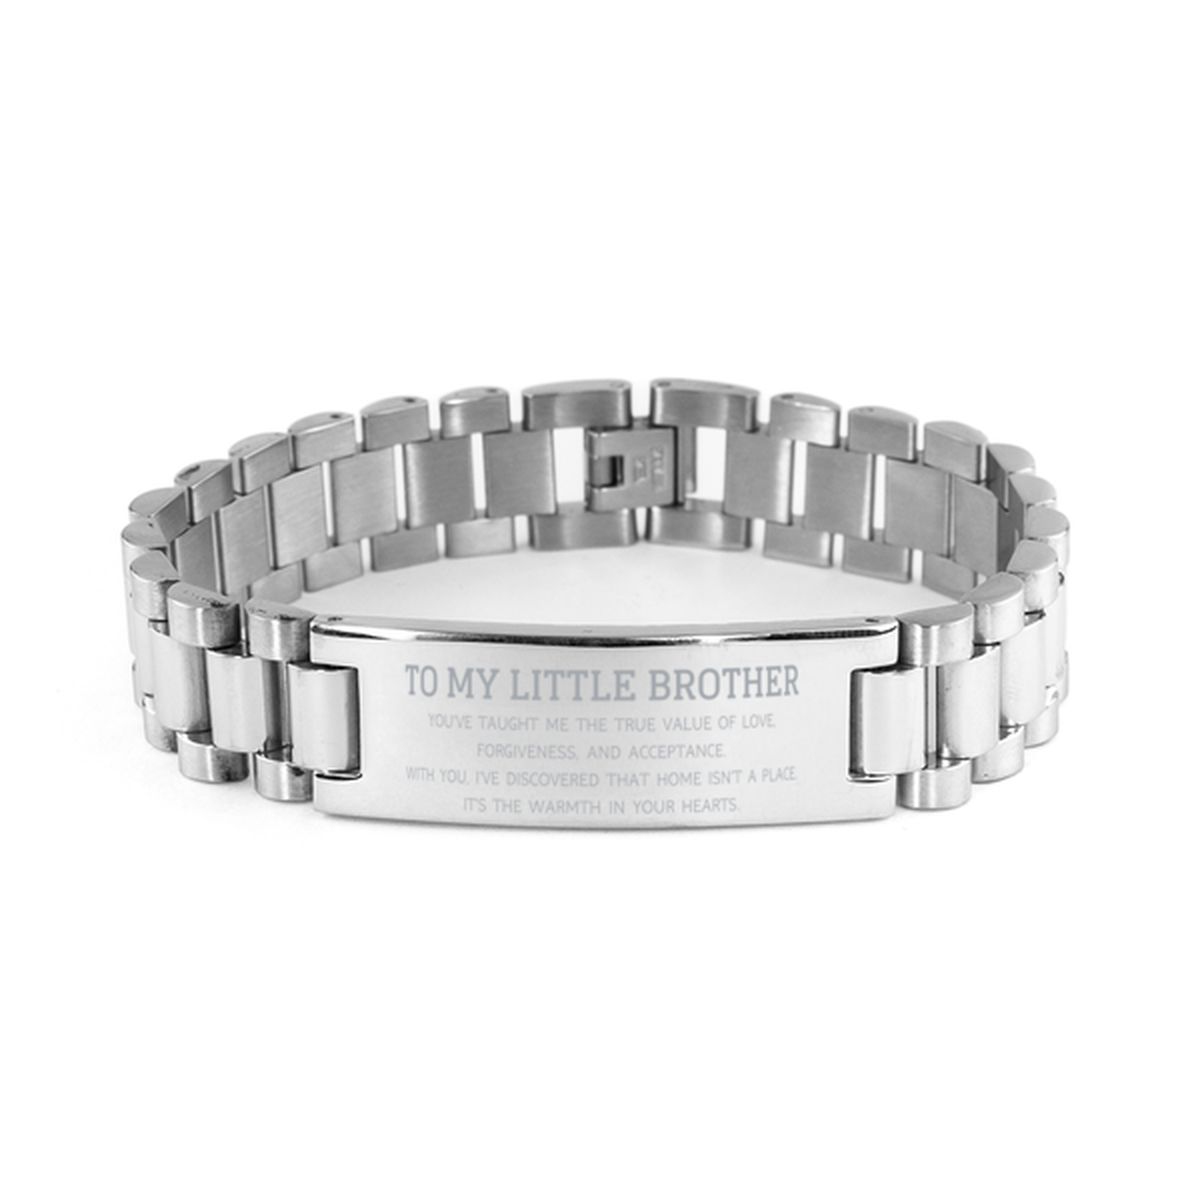 To My Little Brother Gifts, You've taught me the true value of love, Thank You Gifts For Little Brother, Birthday Ladder Stainless Steel Bracelet For Little Brother